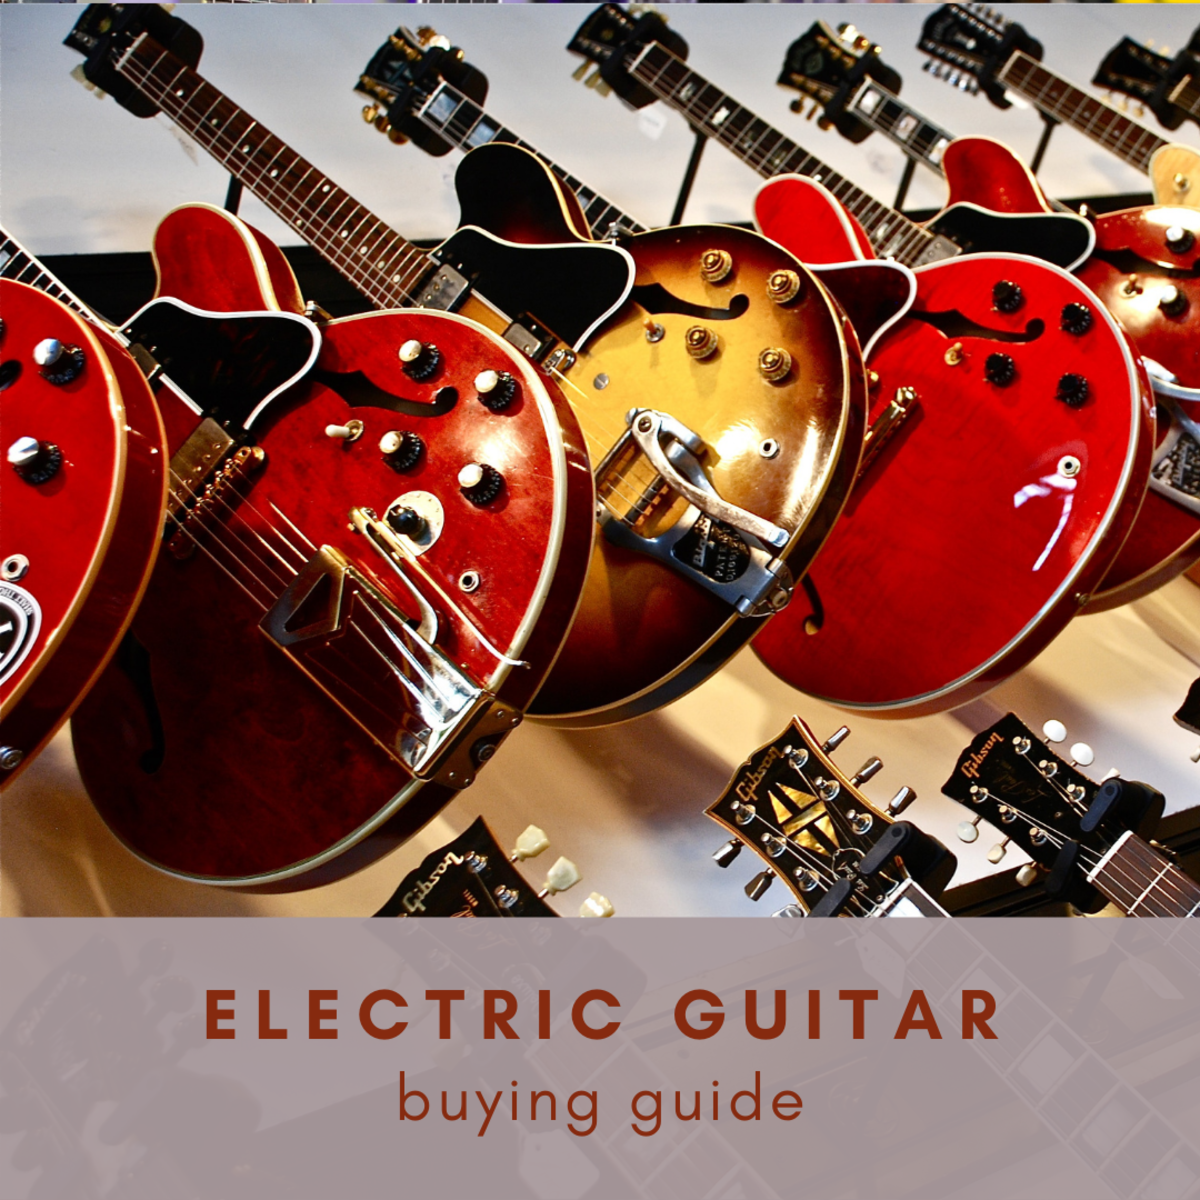 How to Choose an Electric Guitar for a Beginner